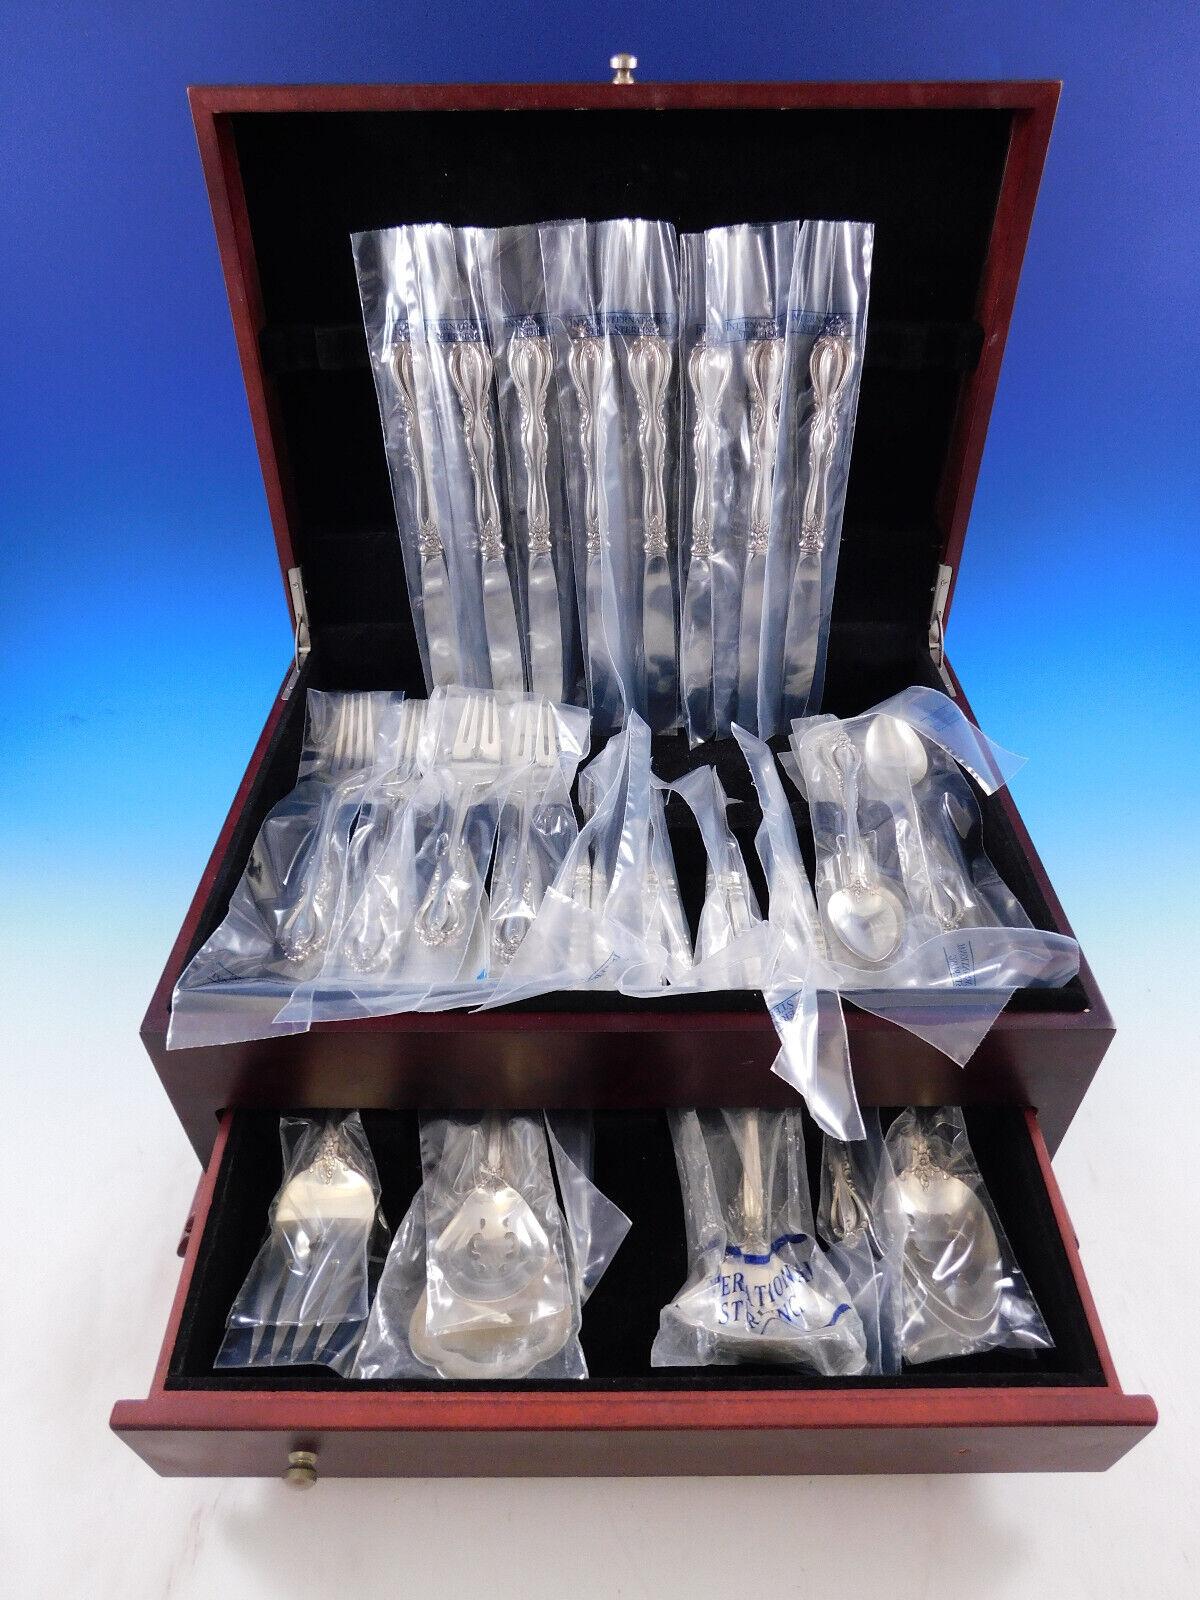 Unused Grande Regency by International sterling silver Flatware set, 50 pieces. This set includes:

8 Knives, 9